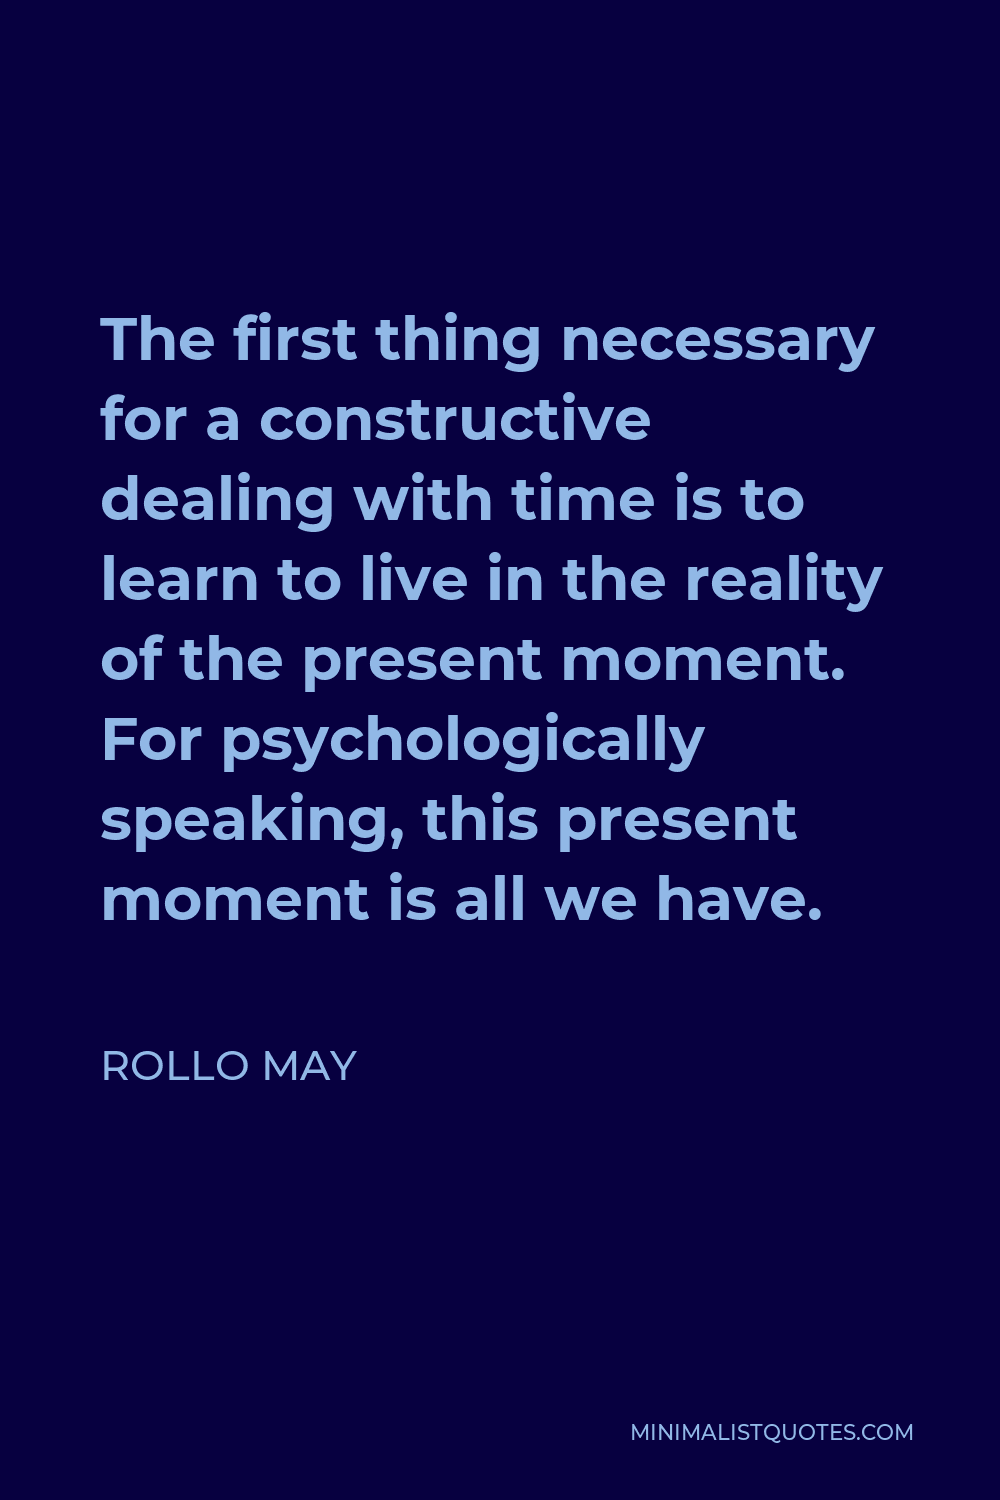 Rollo May Quote - The first thing necessary for a constructive dealing with time is to learn to live in the reality of the present moment. For psychologically speaking, this present moment is all we have.